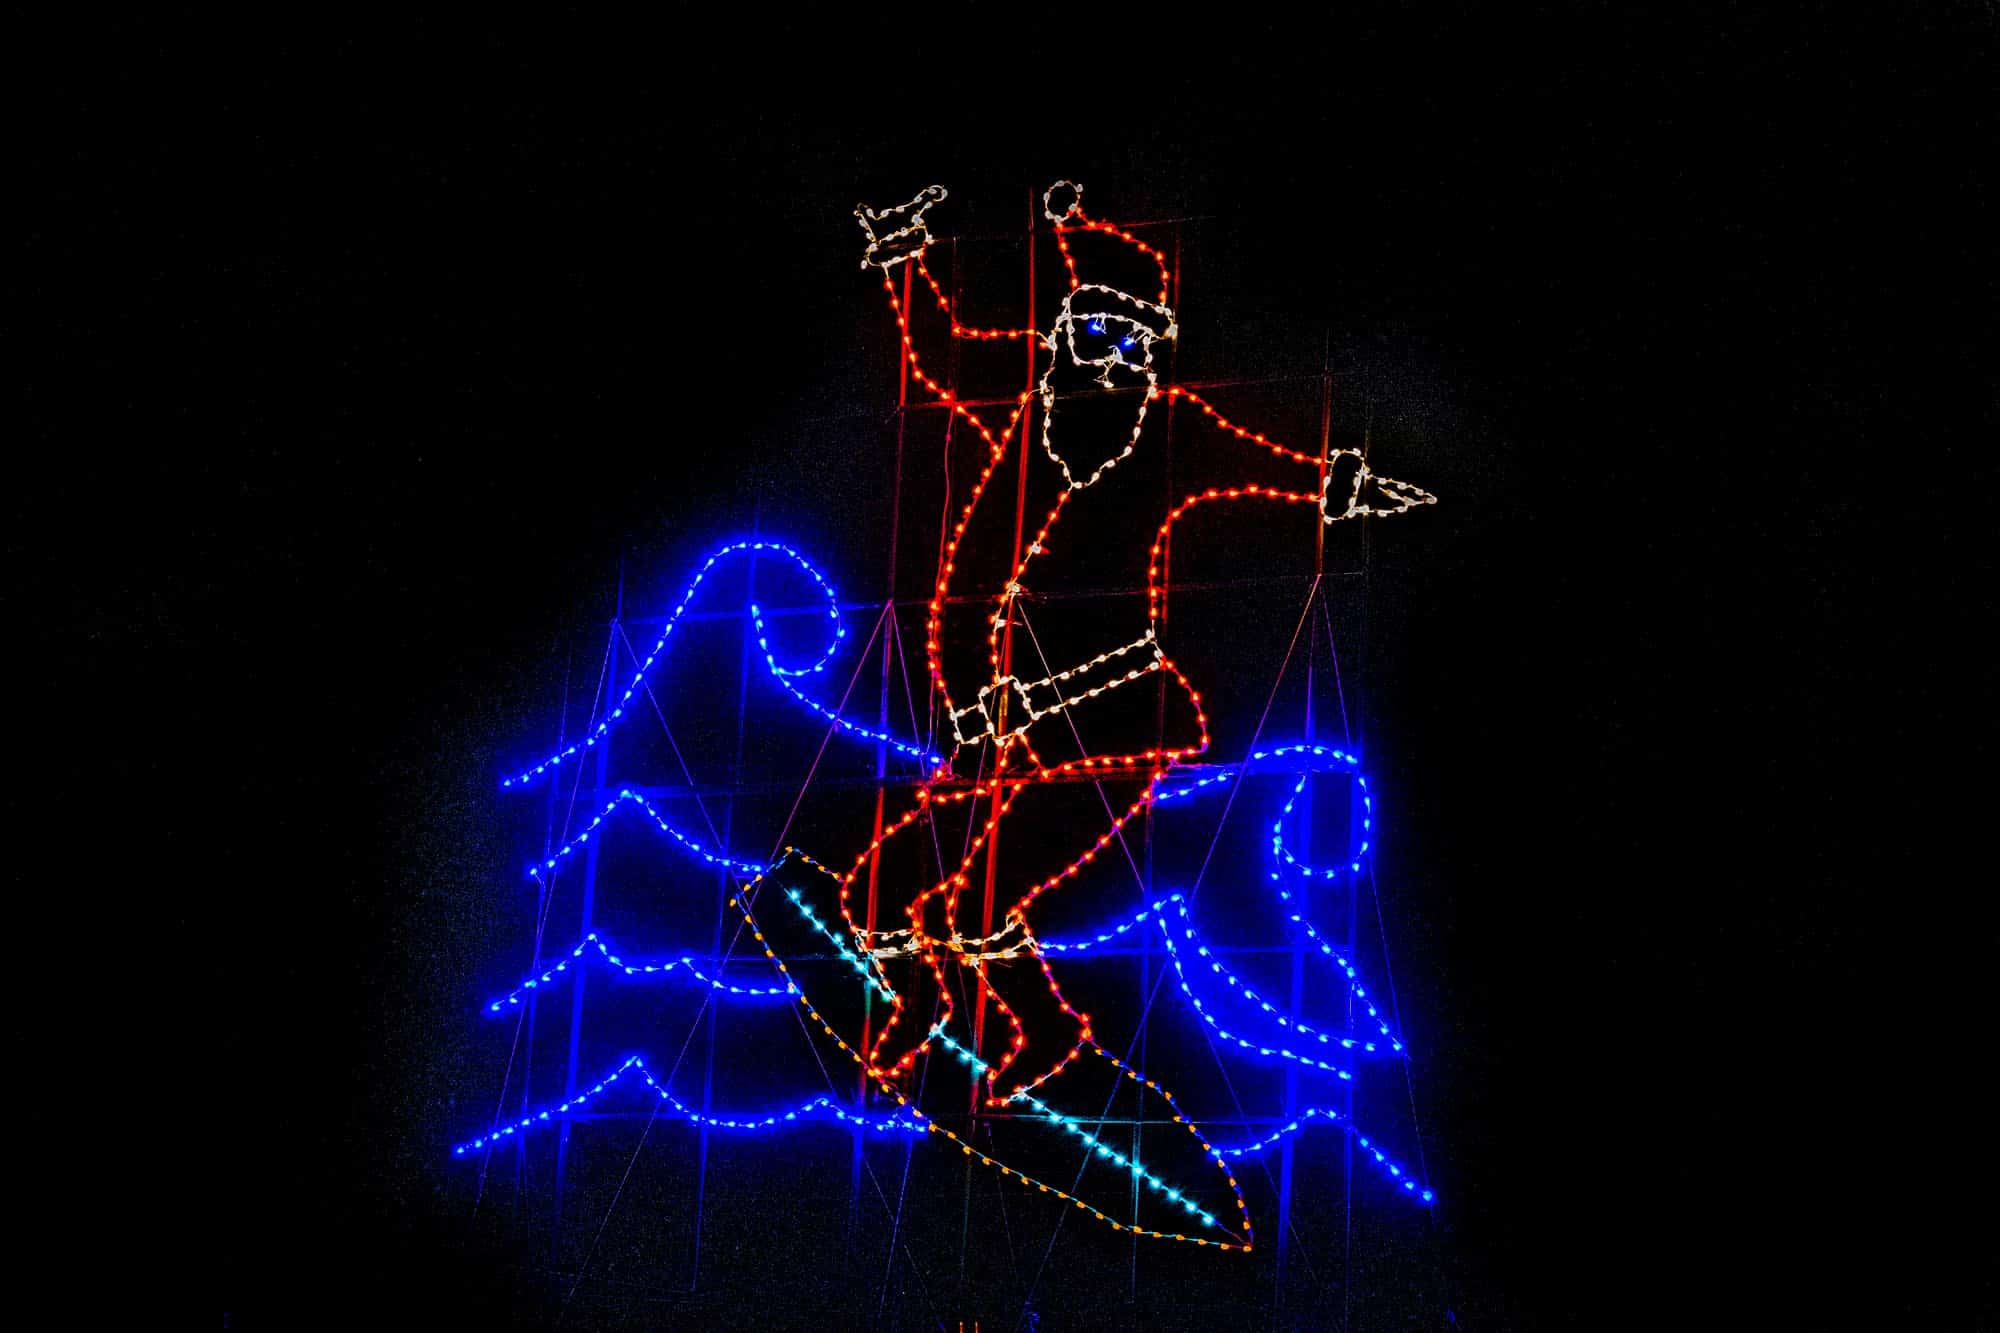 Santa surfing a wave in Christmas lights